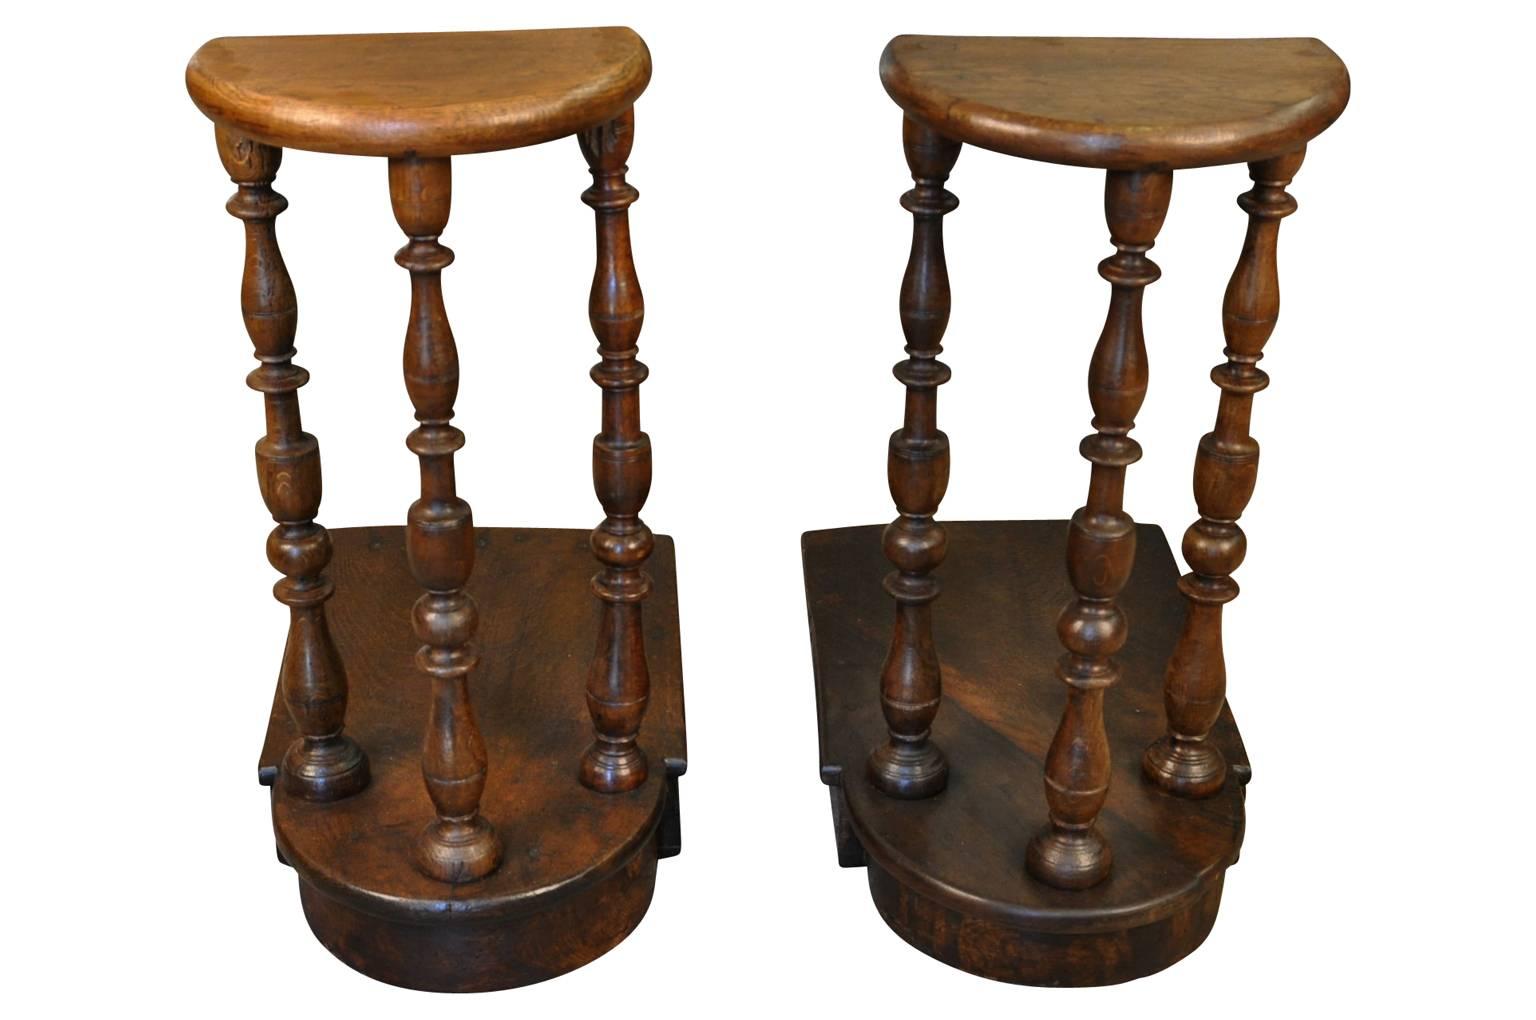 A very lovely pair of mid-19th century tables de chantre side tables from the South of France. Handsomely constructed from chestnut. Wonderful patina - very rich and luminous.